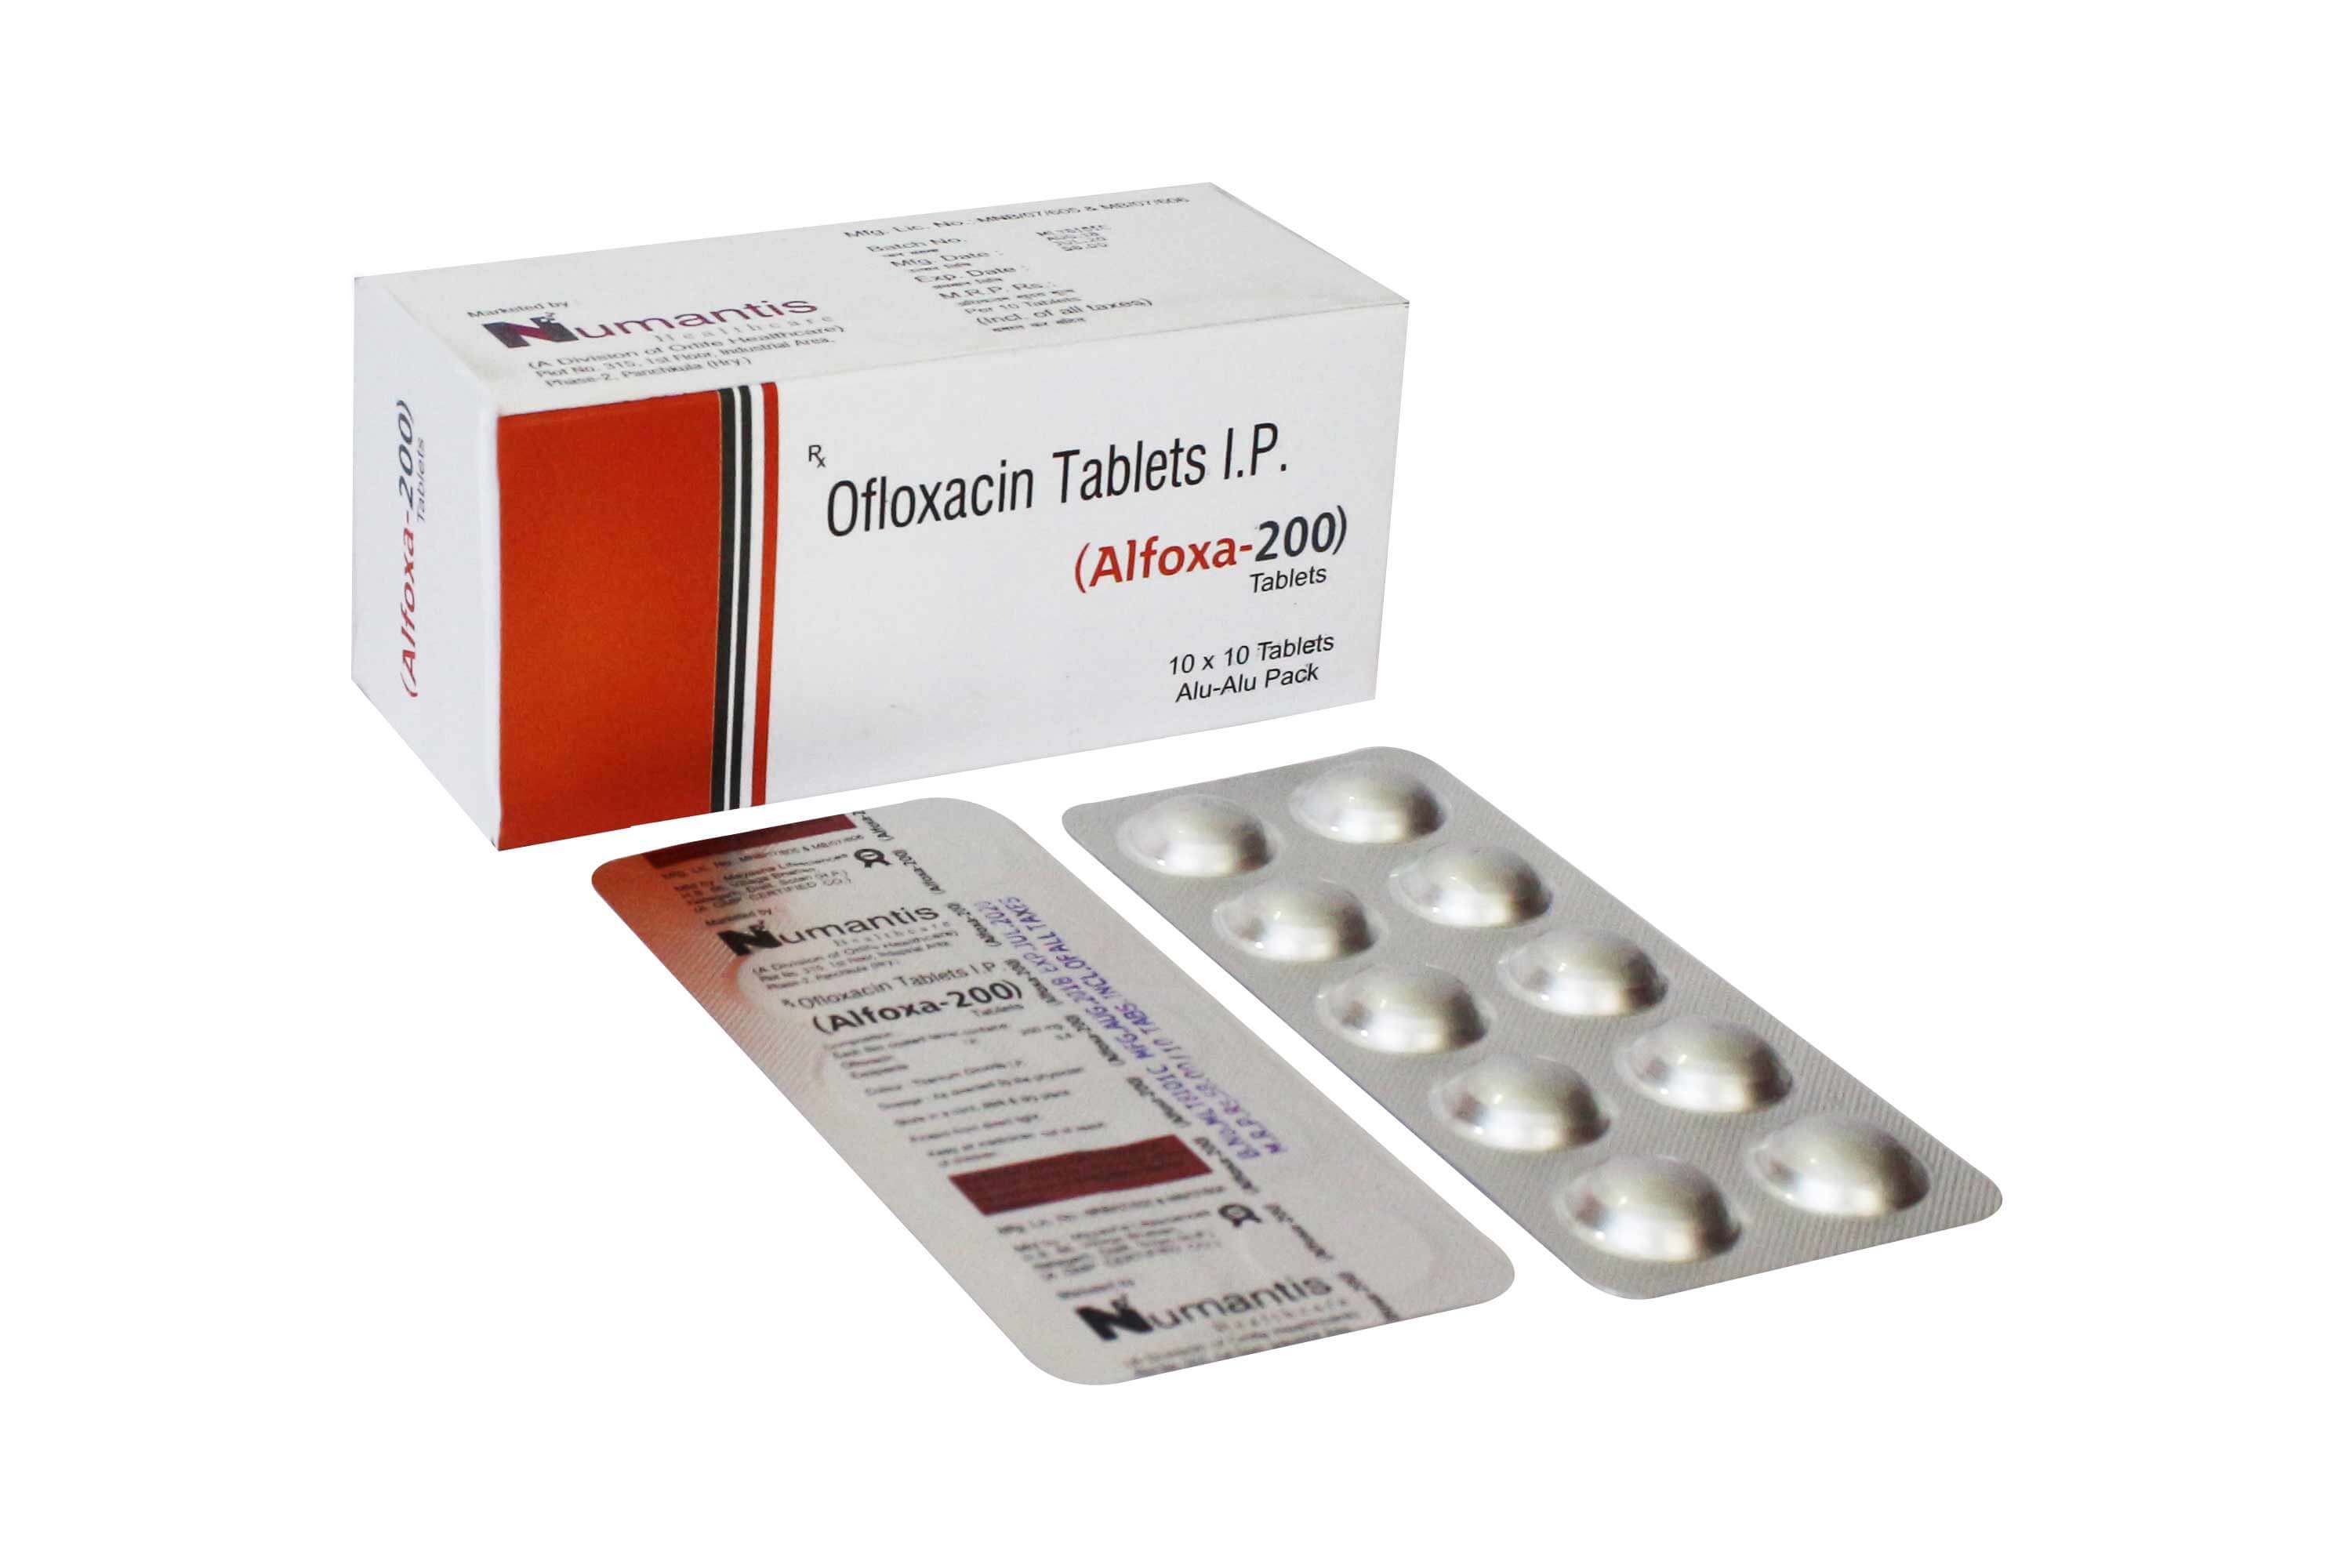 Product Name: Alfoxa 200, Compositions of Alfoxa 200 are Oflaxcin Tablets I.P - Numantis Healthcare